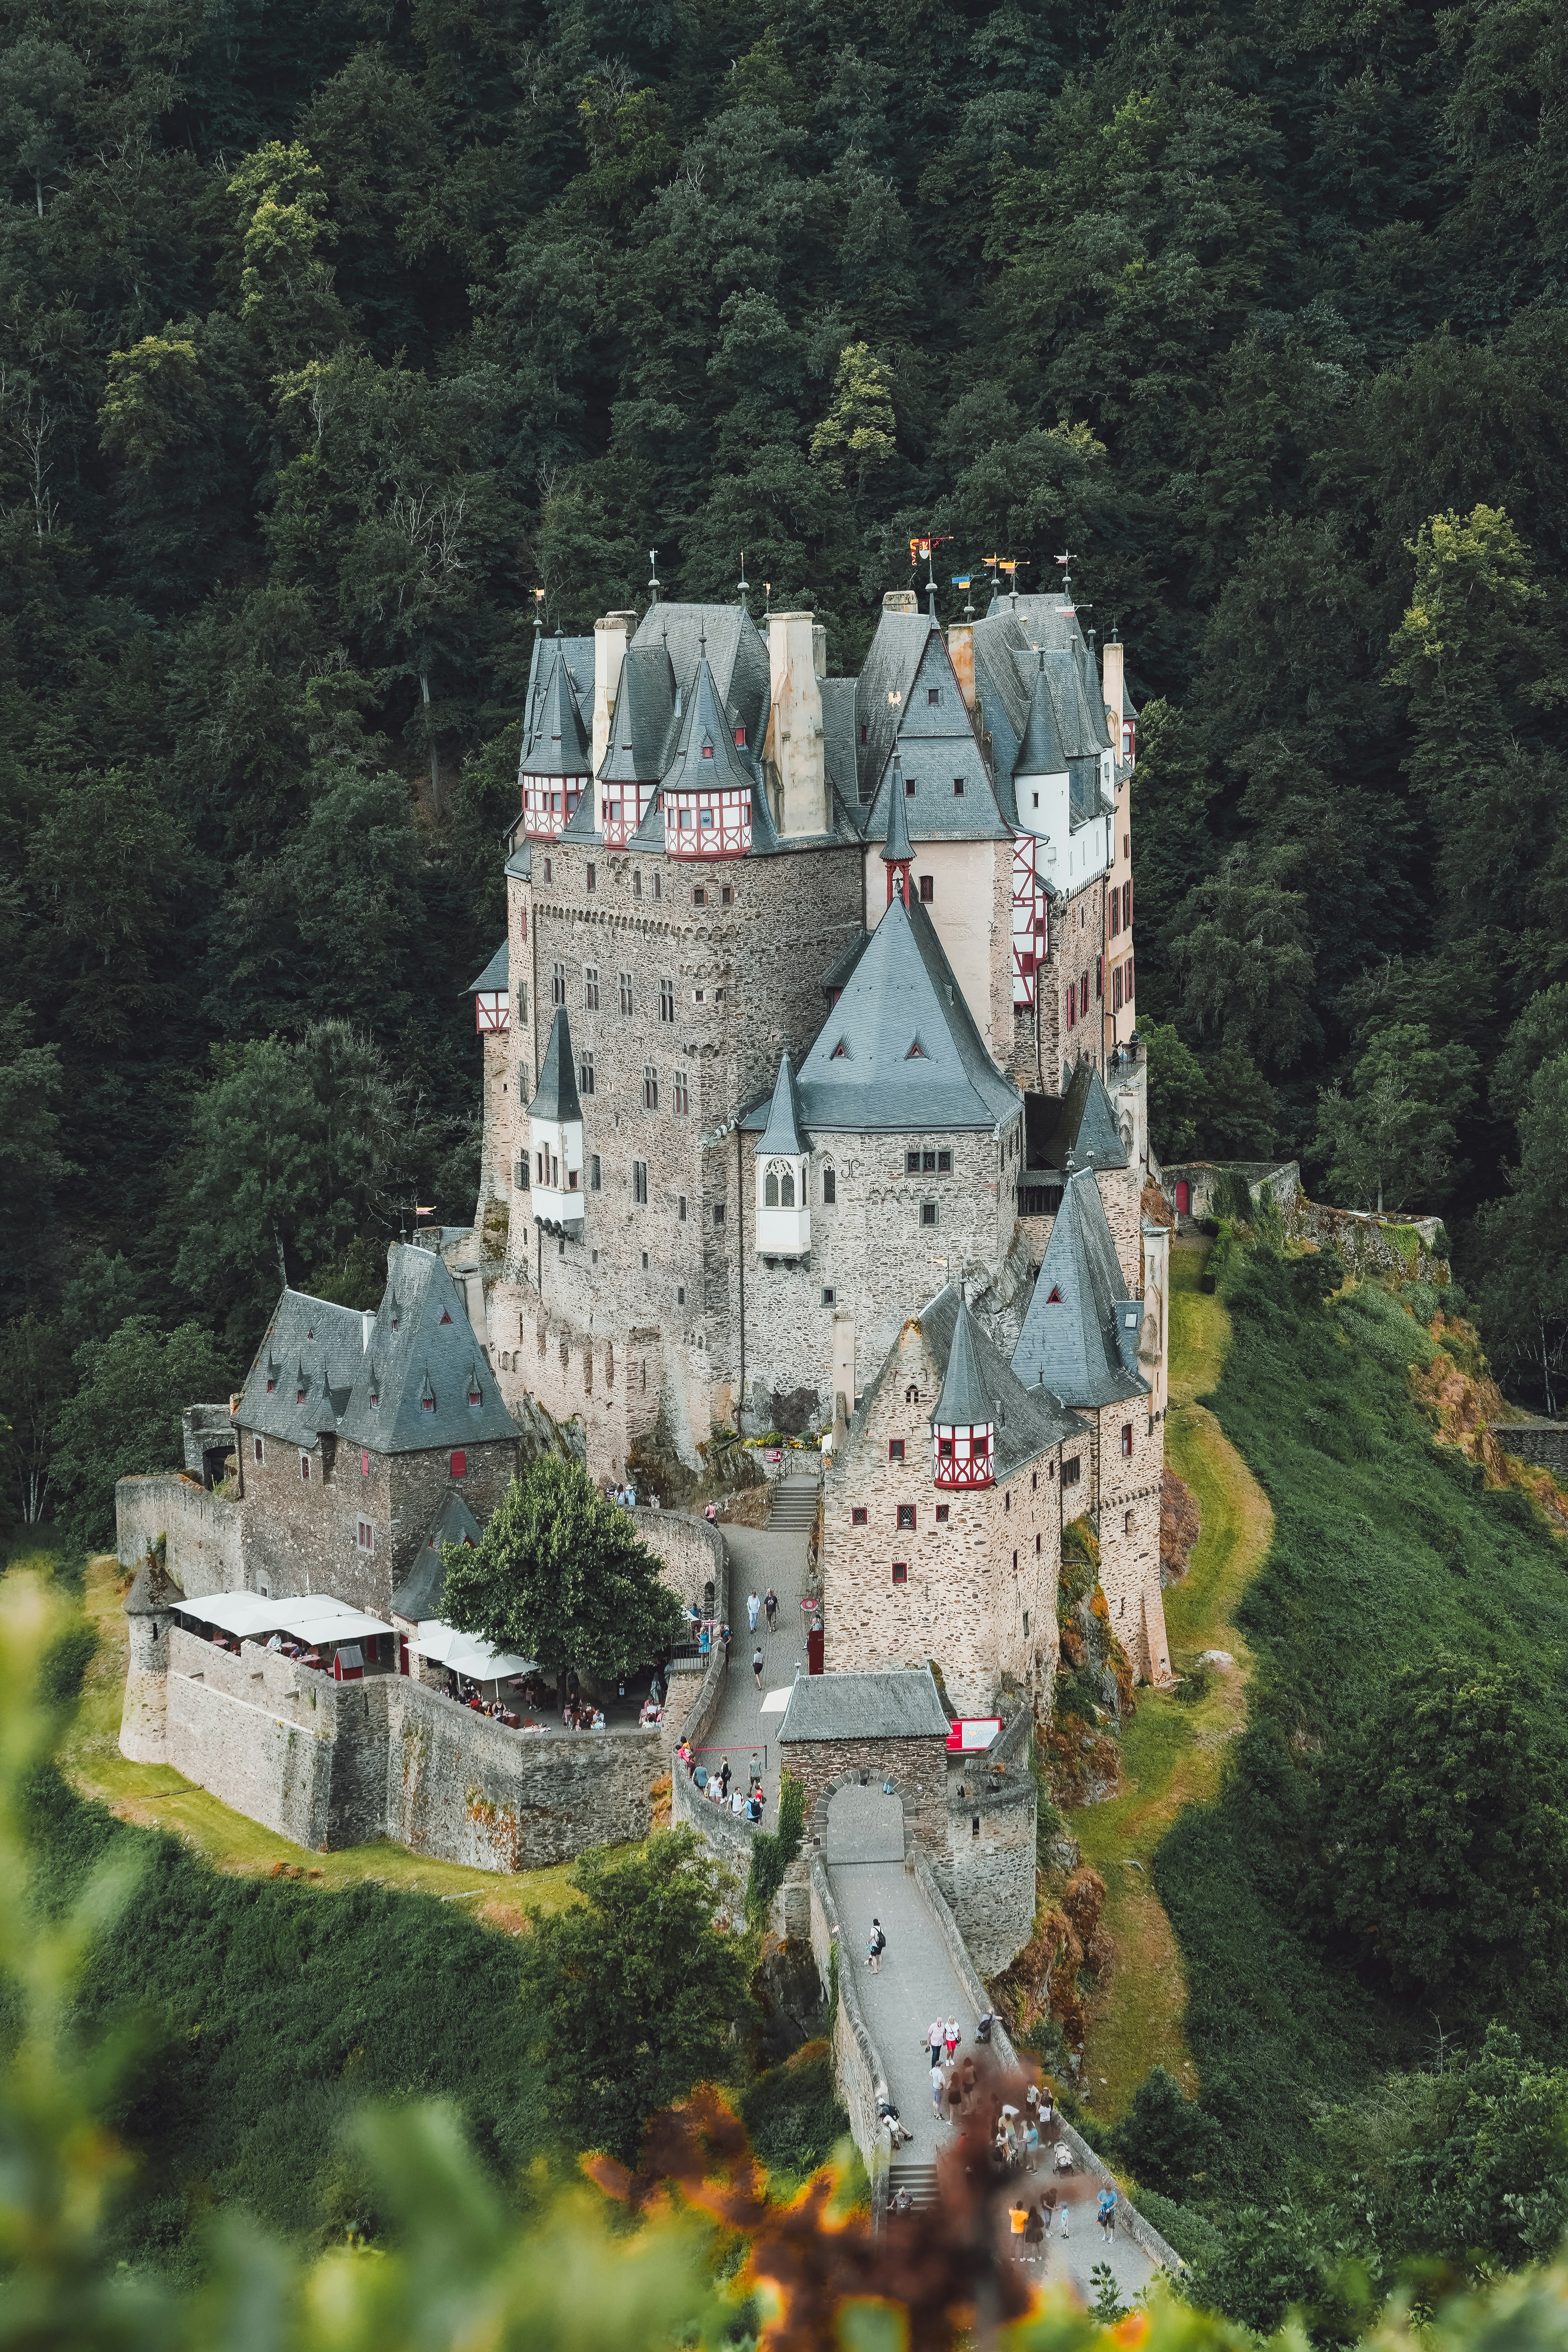 an aerial view of a castle surrounded by trees